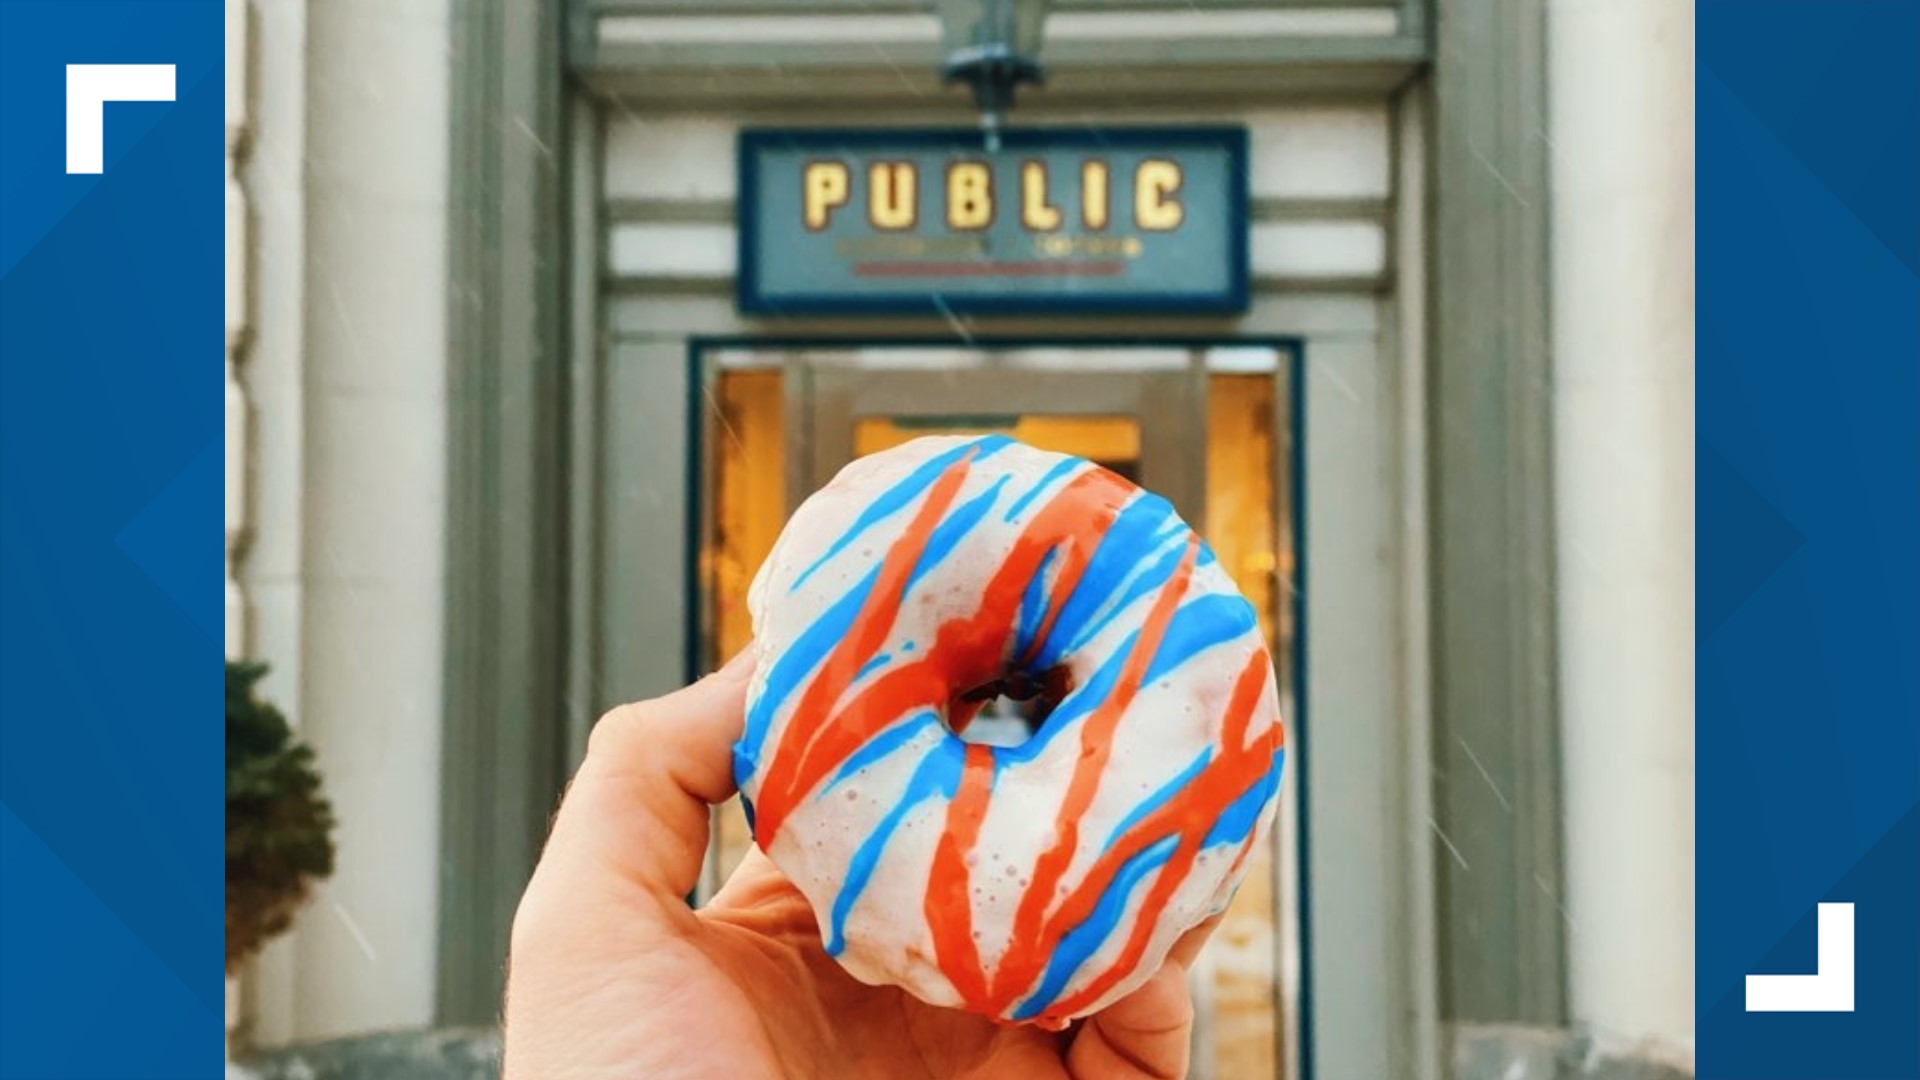 Public Espresso is hoping for a sweet victory by the Buffalo Bills Sunday and is putting their famous donuts on the line.